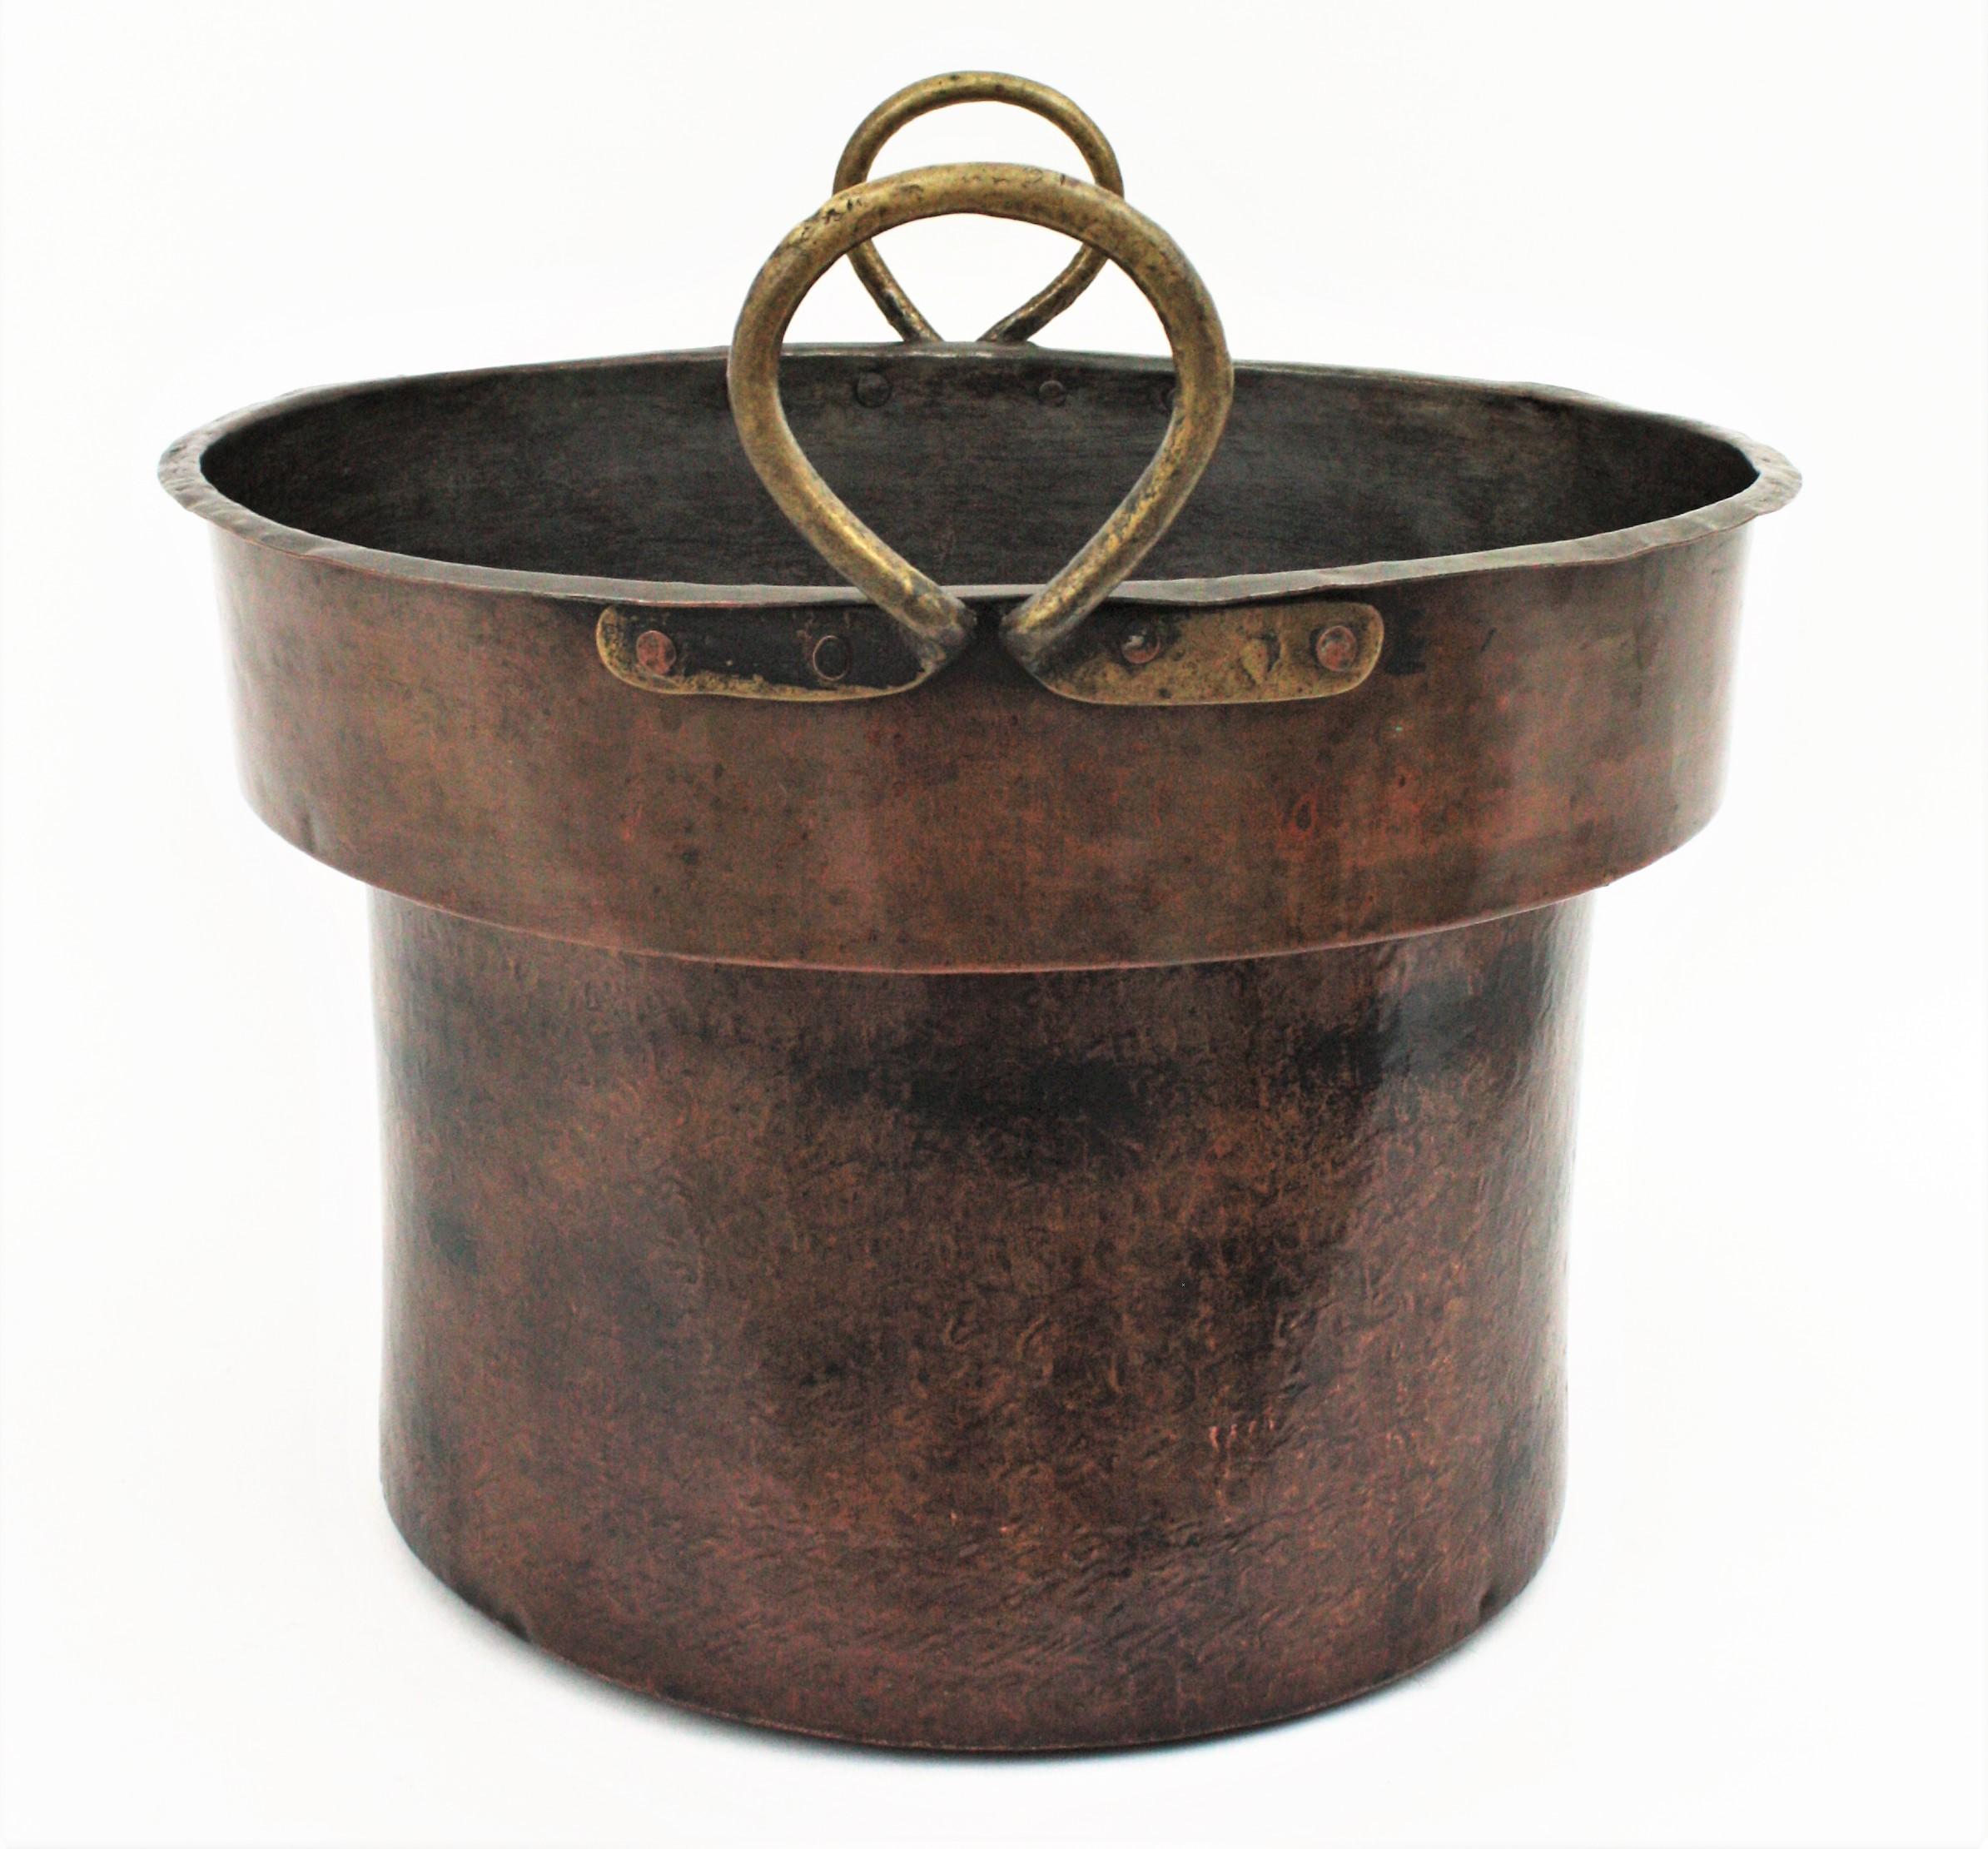 Oversized hand-hammered copper cauldron with brass handles, France, 1880s.
This beautiful handcrafted copper cauldron has a beautiful design and a dramatic aged patina.
Its large size allows to be used as log holder, decorative storage basket,